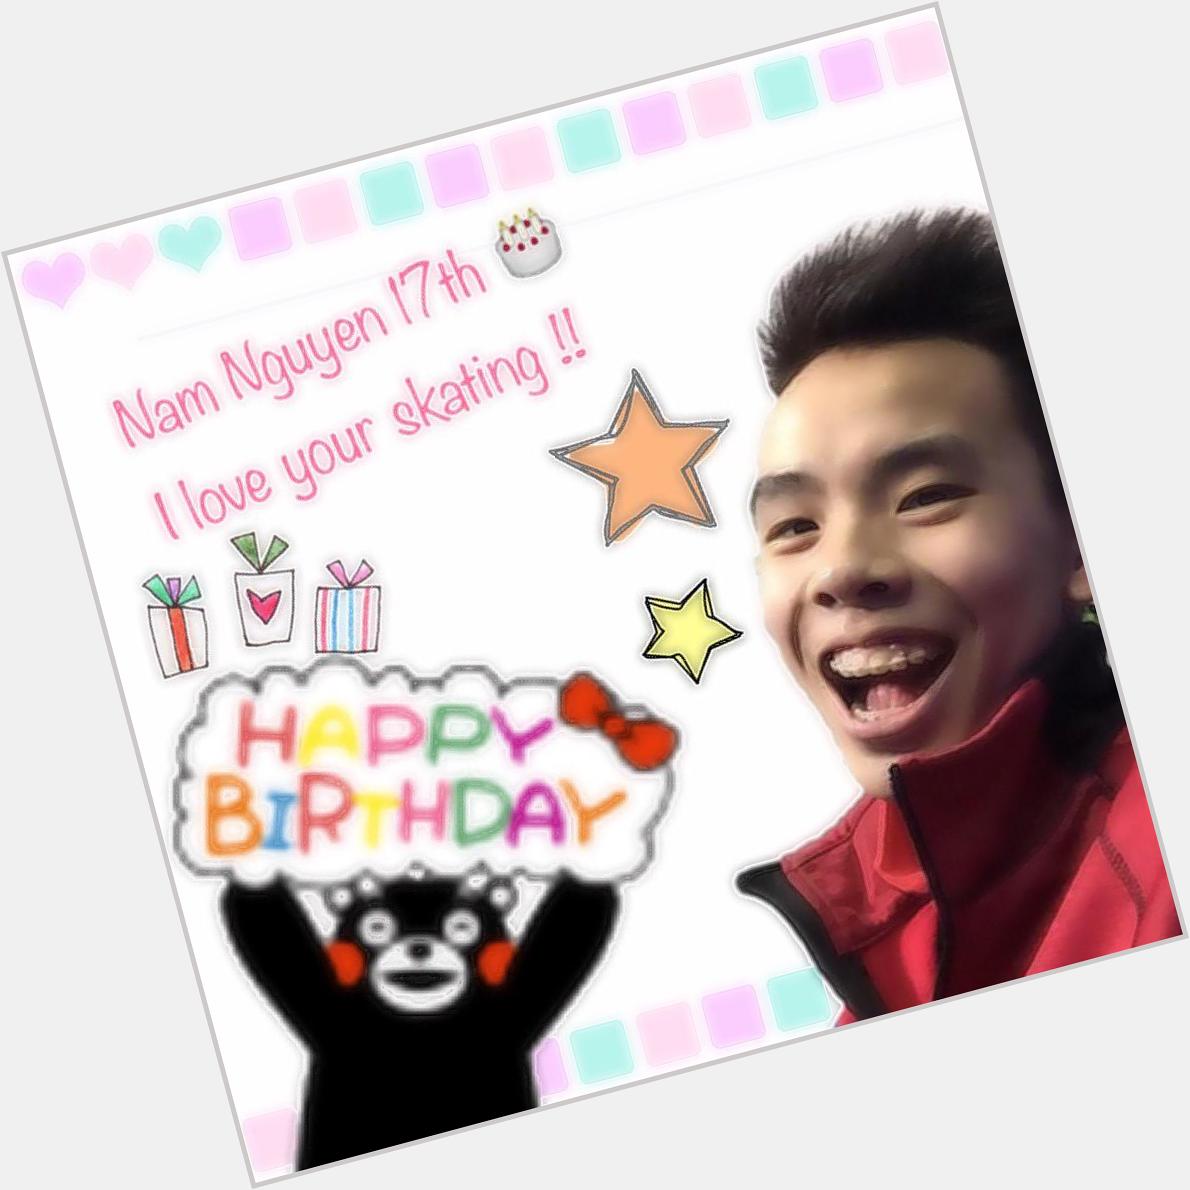 5.20 wed Happy Birthday Nam Nguyen( ° °)- I love your smile   Please enjoy 17th years old     